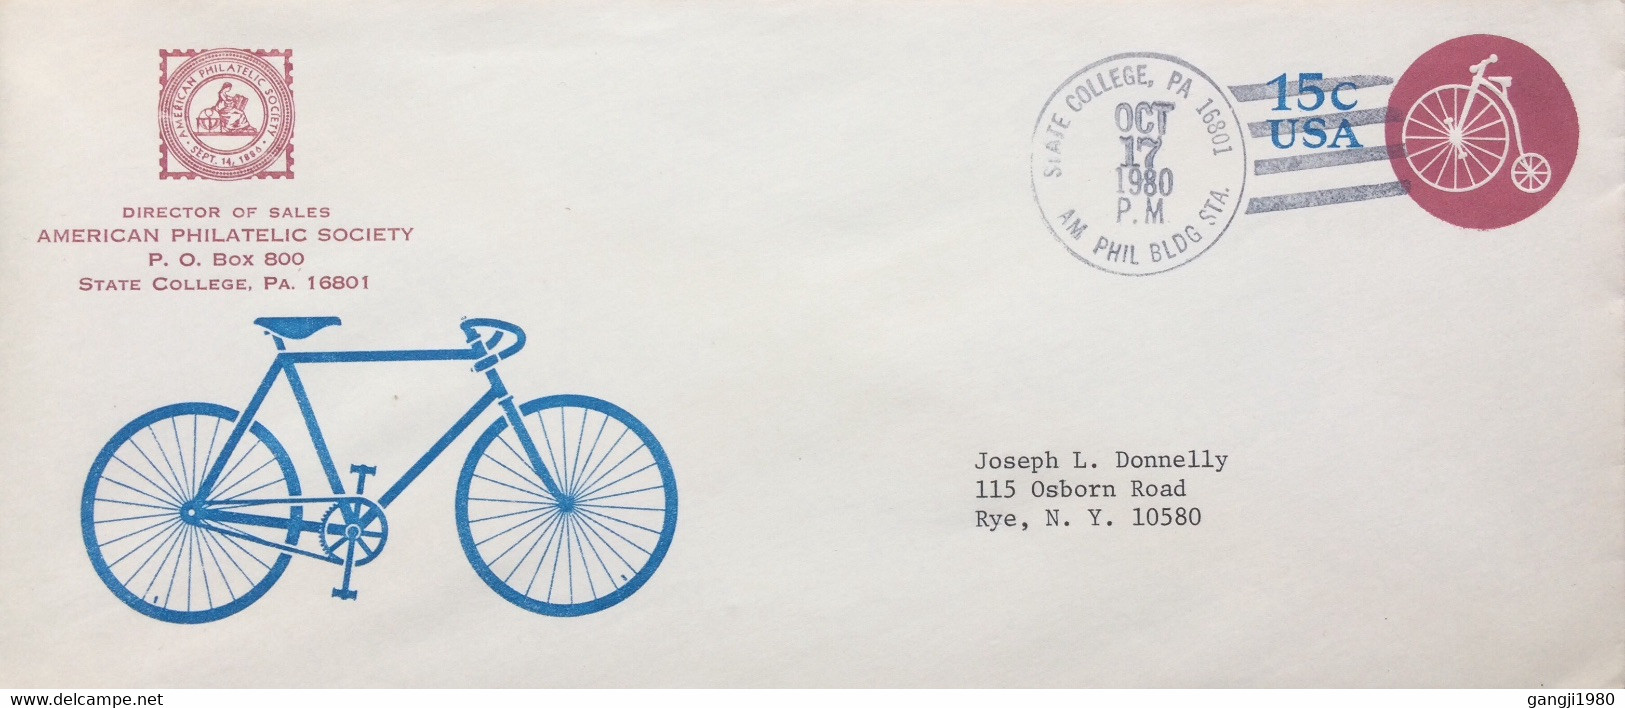 USA 1980, STATIONERY, ILLUSTRATE COVER USED,  “CYCLE” STATE COLLEGE CANCEL,AMERICAN PHILATELIC SOCIETY, - Covers & Documents